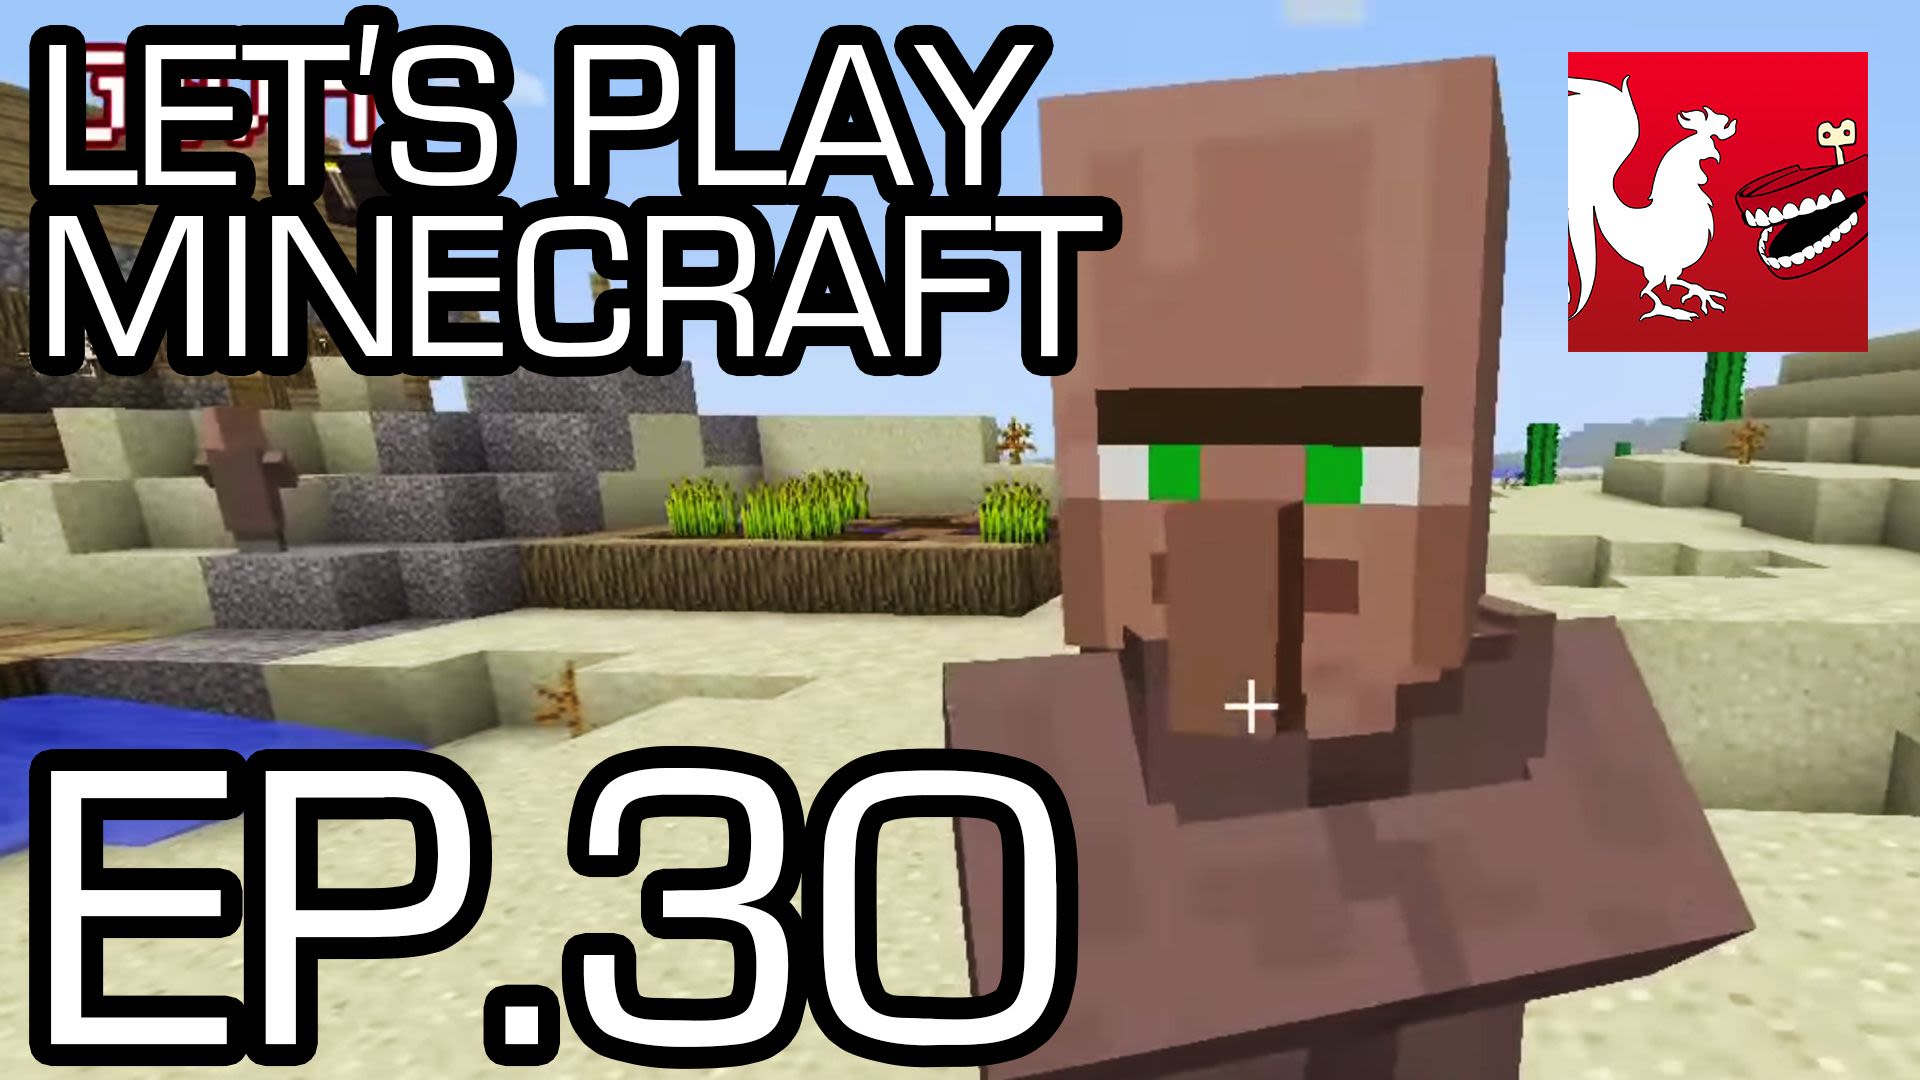 Series Let's Play Minecraft - Rooster Teeth